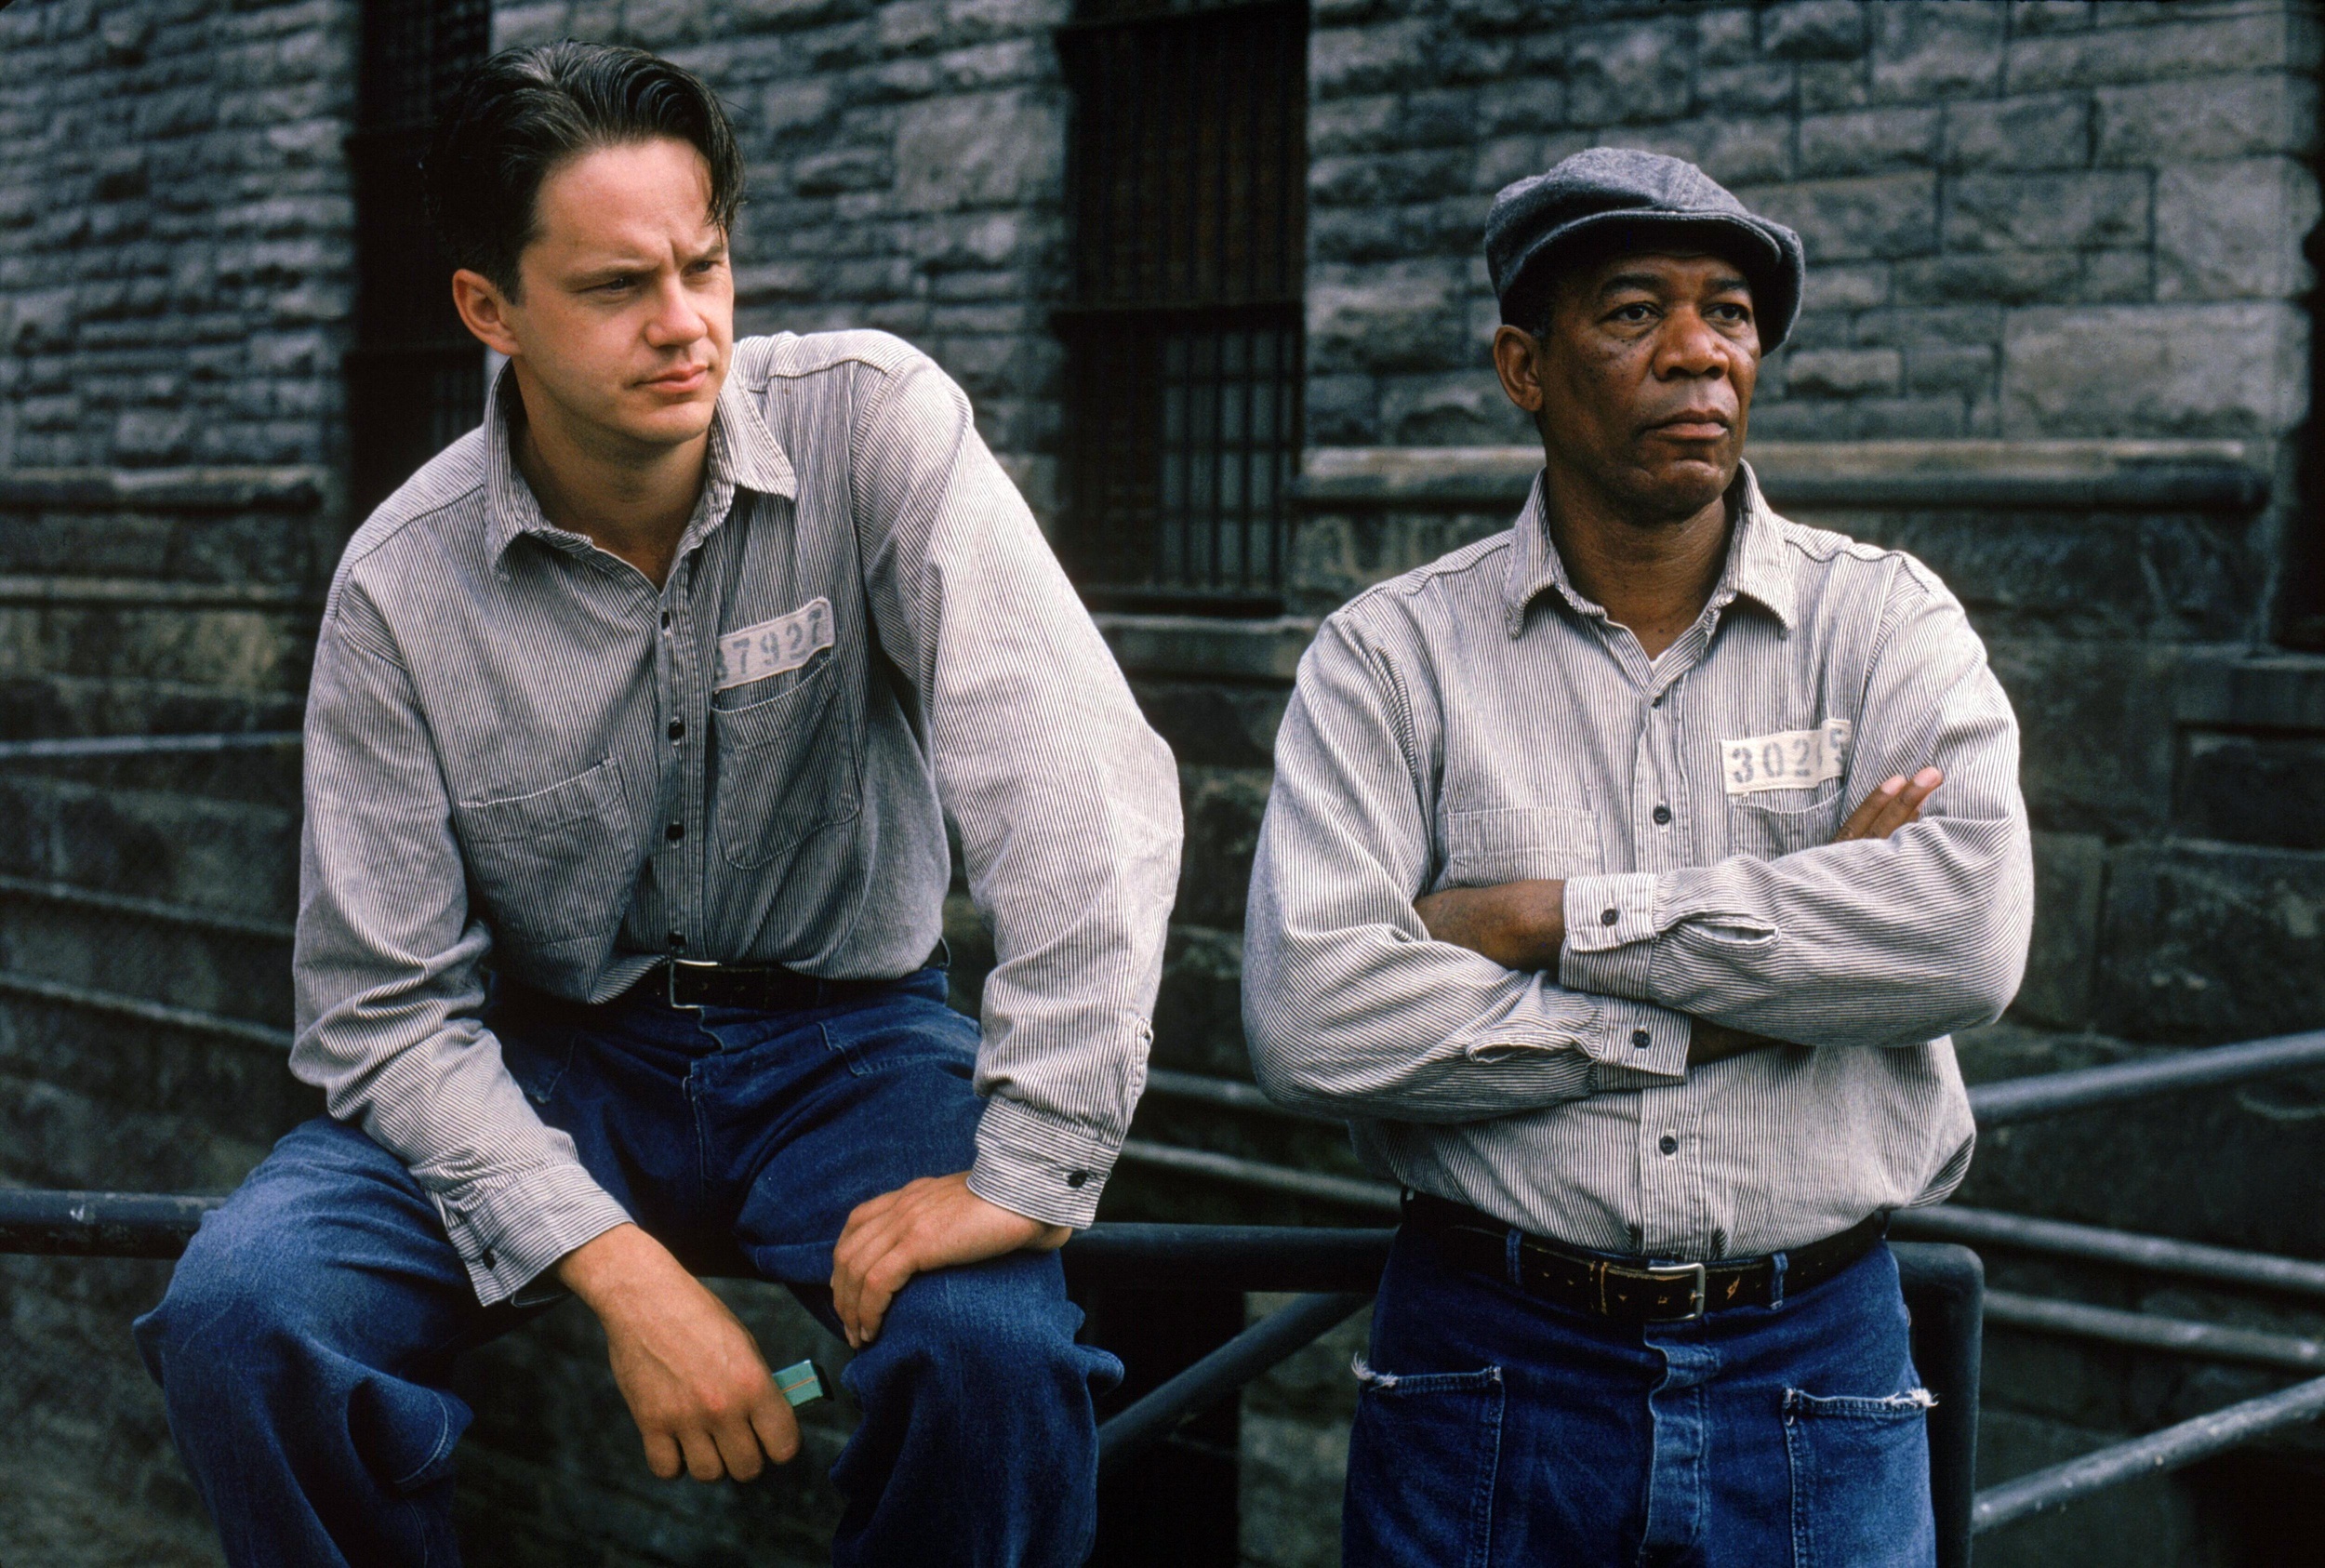 <p>While “The Shawshank Redemption” is not a two-hander between Tim Robbins and Morgan Freeman, the characters of Andy and Red dominate on the memorable quote front. Andy’s refrain of “Get busy living, or get busy dying” is arguably the most-quoted line from the film.</p><p>You may also like: <a href='https://www.yardbarker.com/entertainment/articles/the_most_memorable_pop_culture_aliens_and_extraterrestrials_120123/s1__34247132'>The most memorable pop culture aliens and extraterrestrials</a></p>